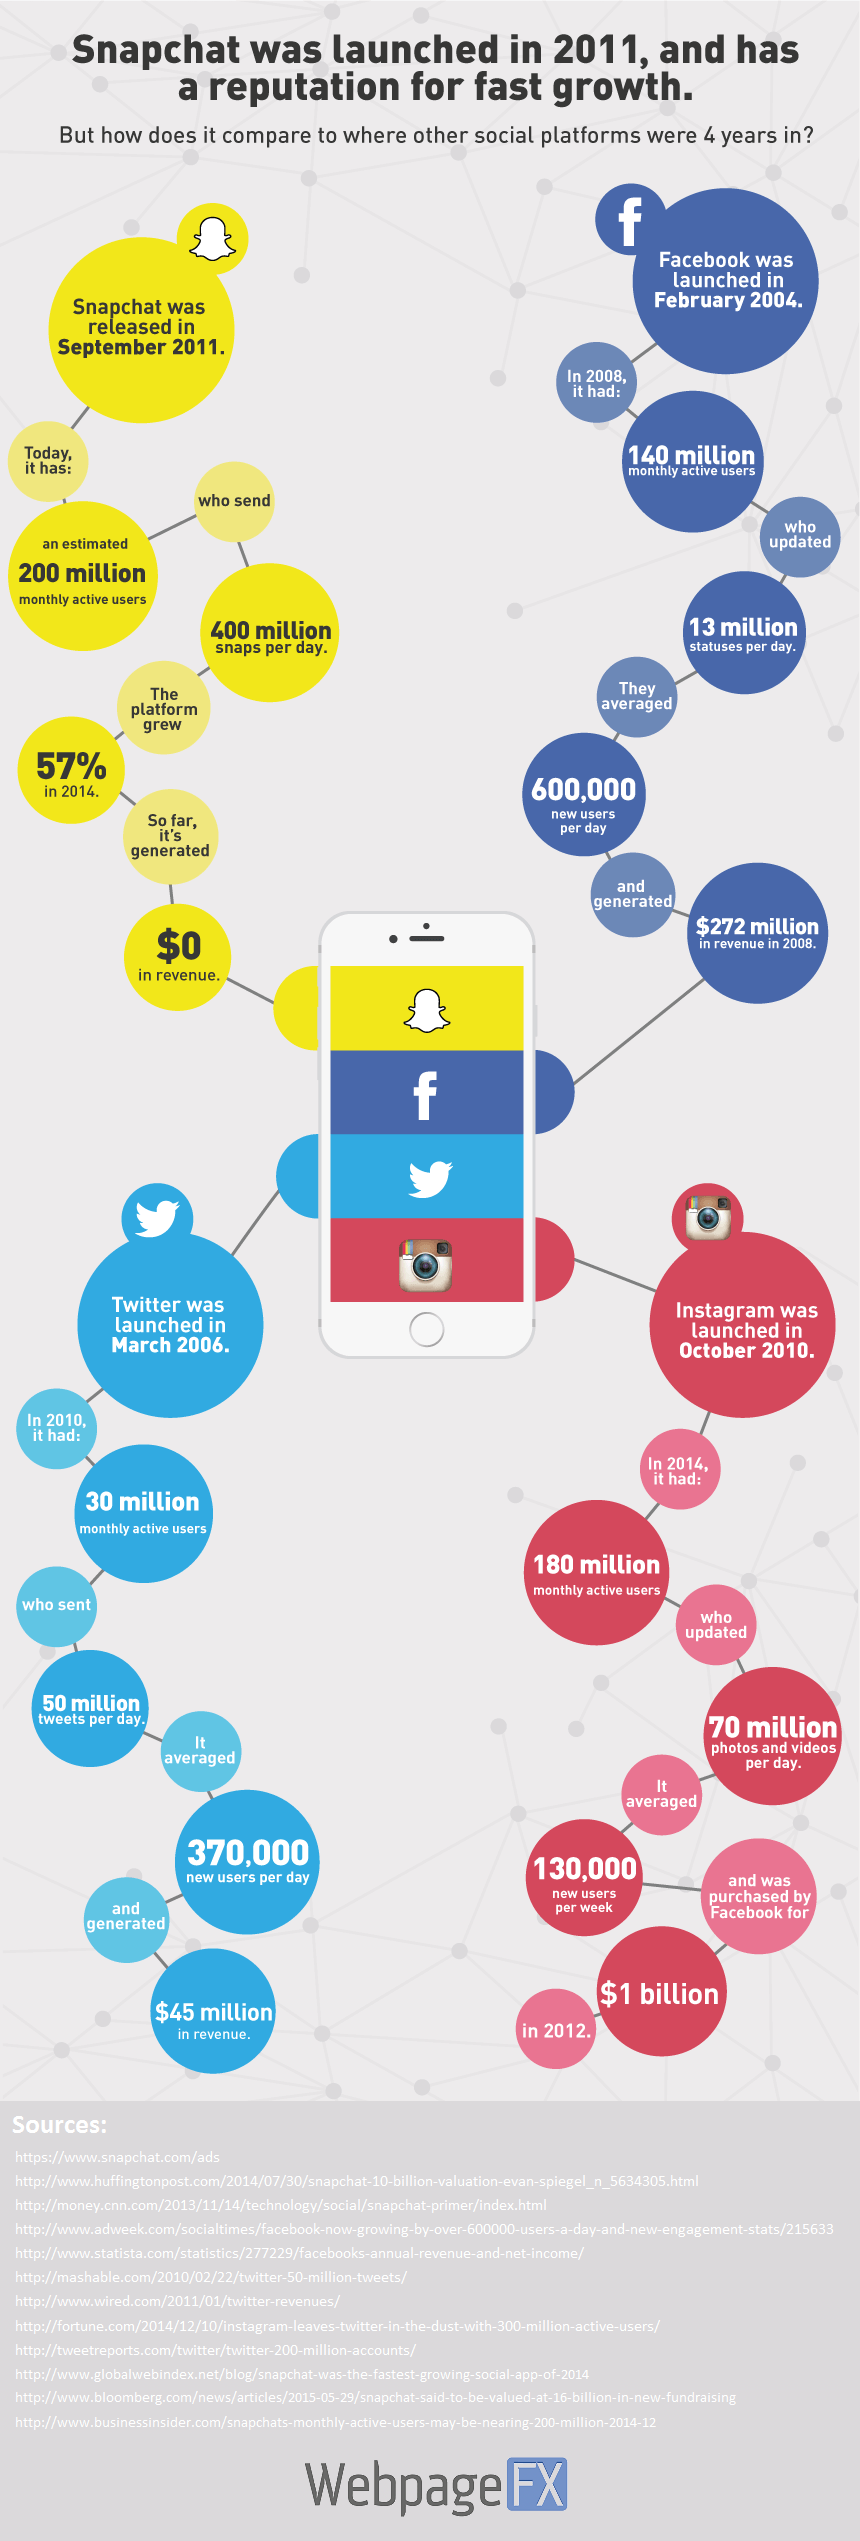 snapchat-growth-infographic (1)